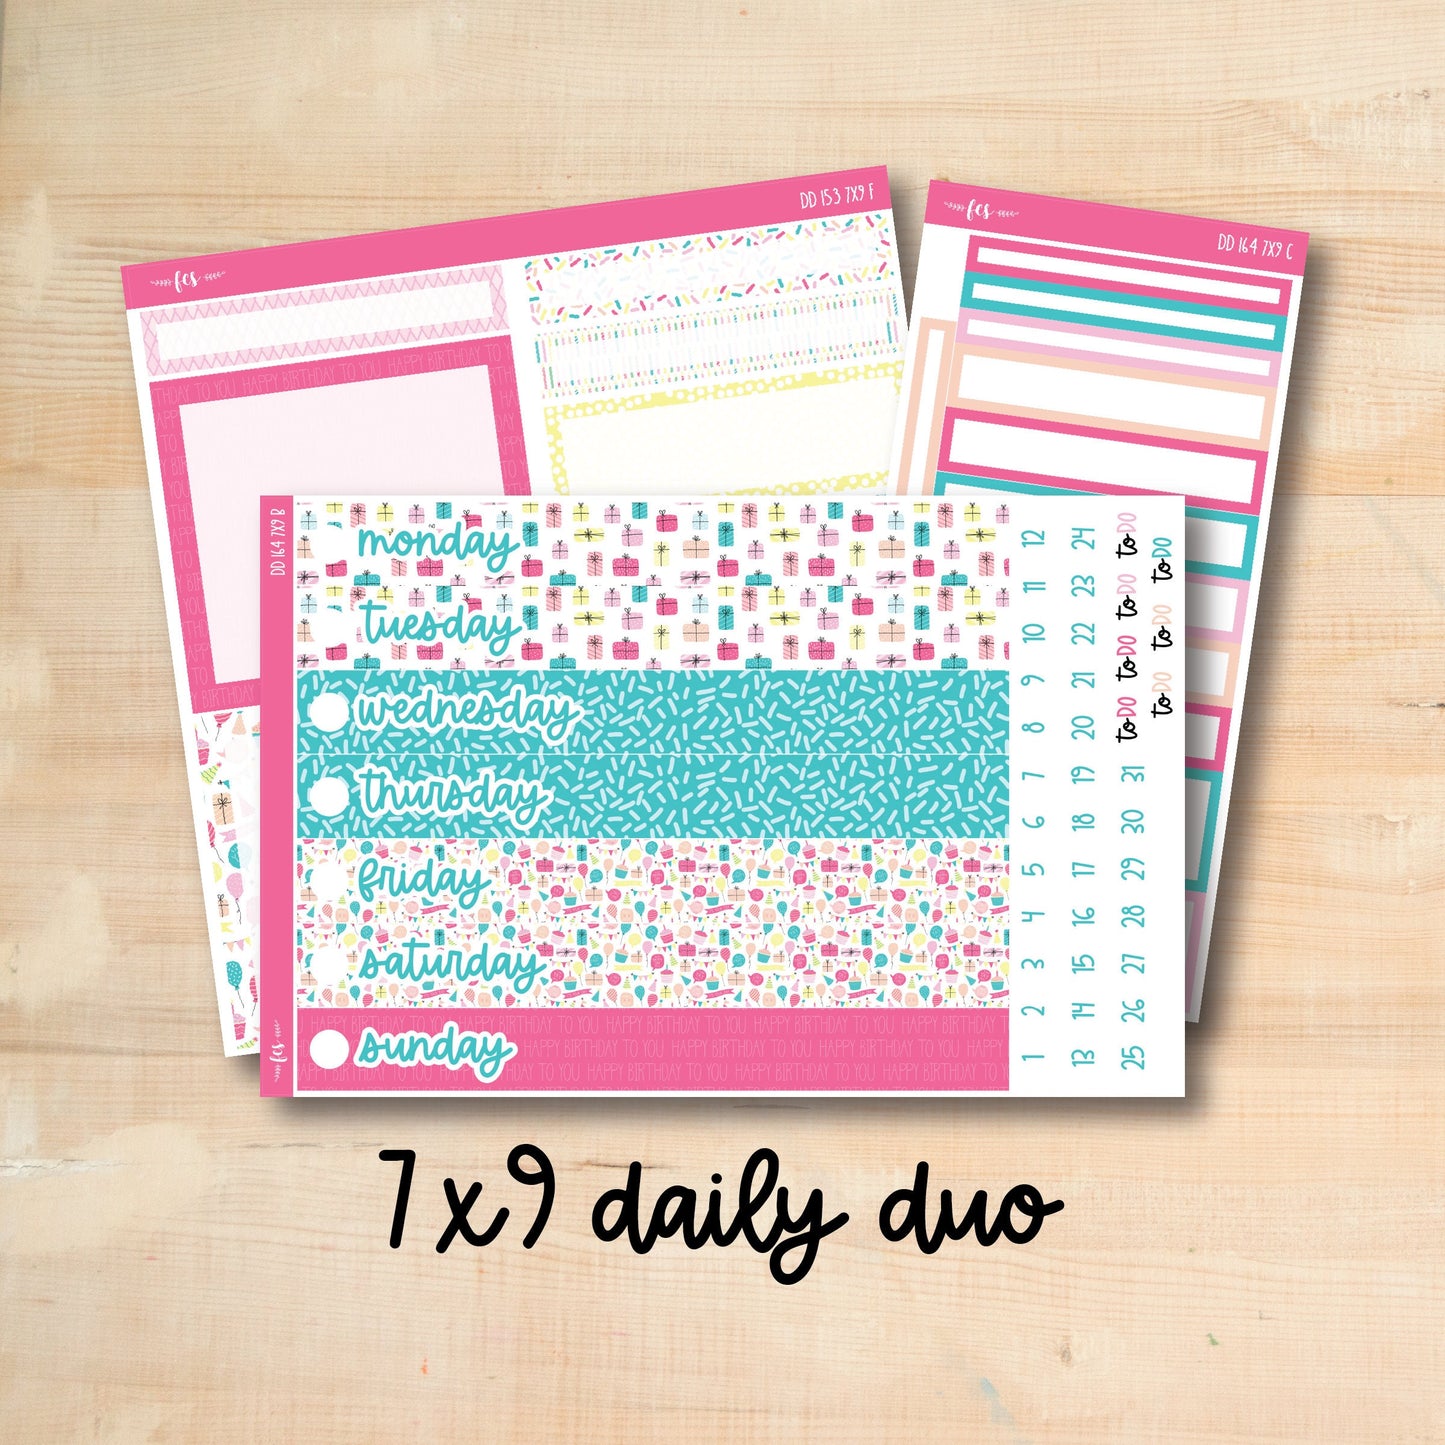 7x9 Daily Duo 164 || BIRTHDAY PARTY 7x9 Daily Duo Kit